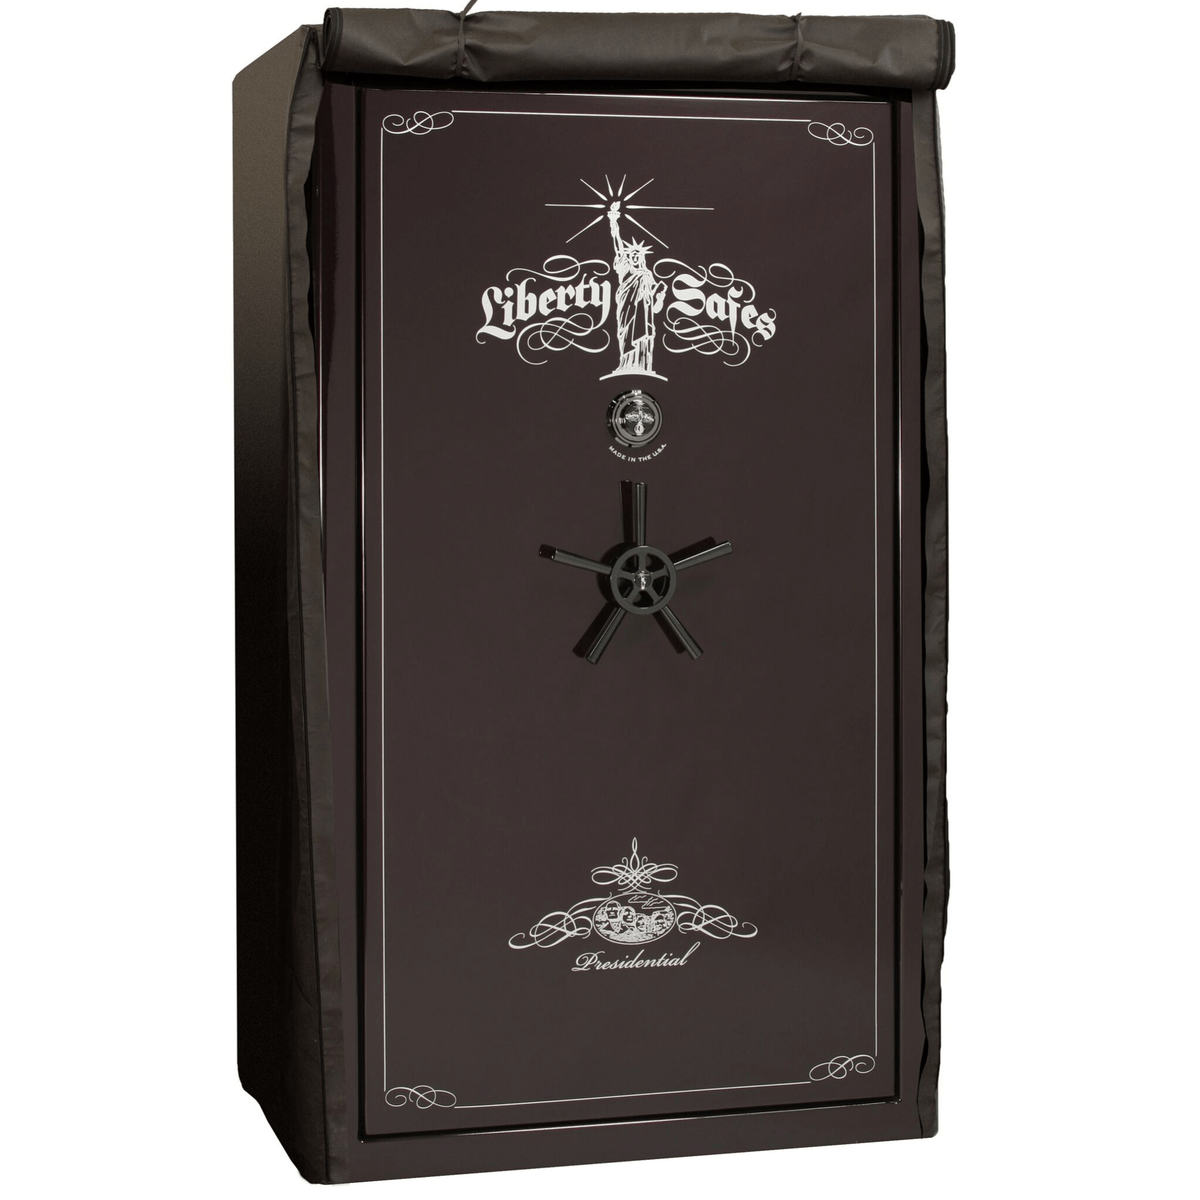 Accessory - Security - Safe Cover - 50 size safes